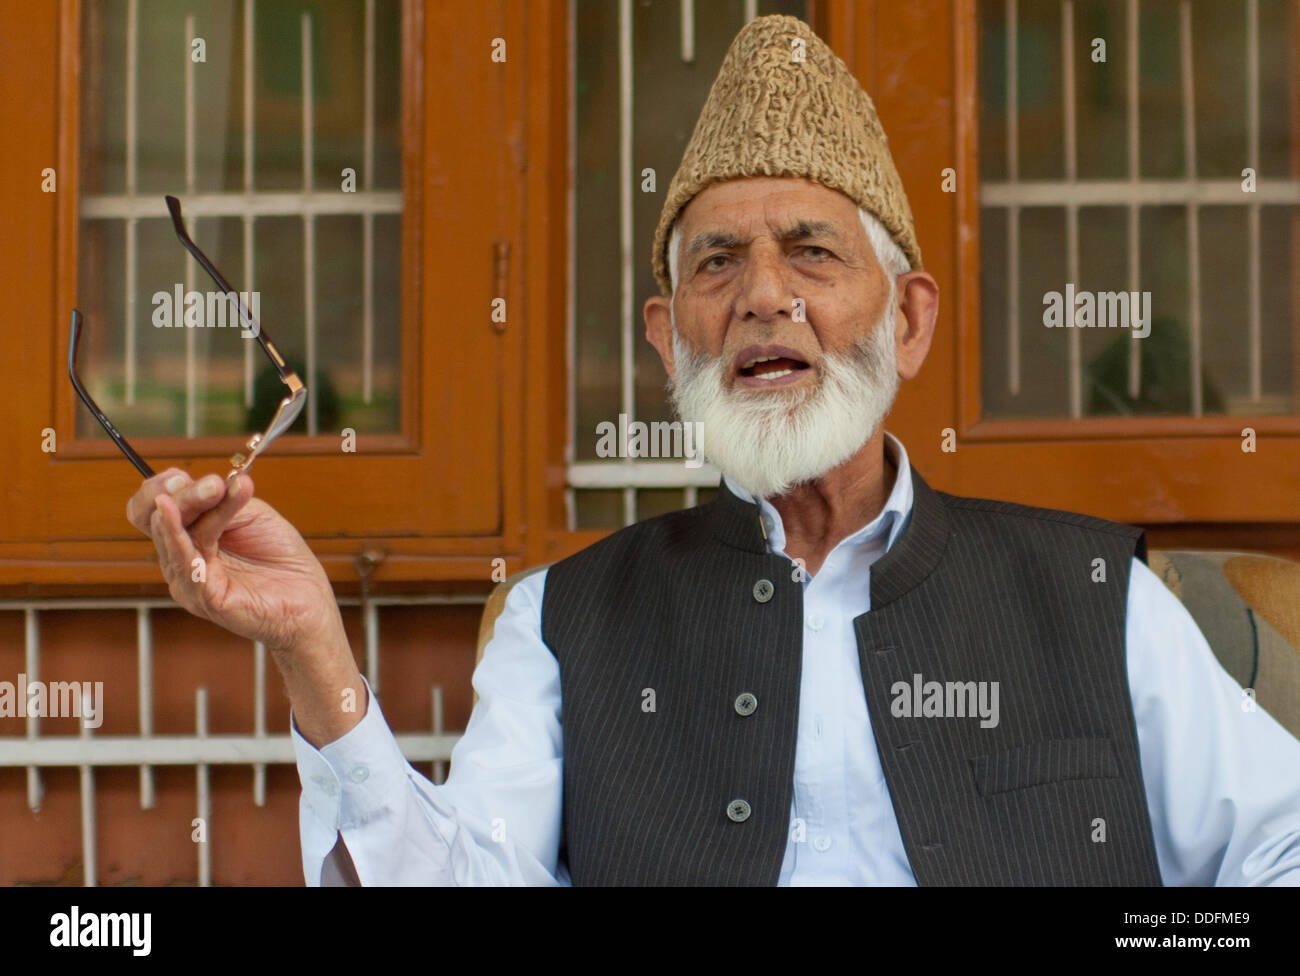 Srinagar, India. 2 September 2013.  Kashmiri separatist leader Syed Ali Geelani addresses a press conference in Srinagar, the summer capital city of Indian-administered Kashmir.  Mr Geelan called for a shutdown on September 7 and peaceful protests on September 6 against  world-renowned orchestra-conductor Zubin Mehta's concert in Srinagar , saying the  event  was meant to divert attention of the international community from 'gross human rights violations being committed by Indian forces against Kashmiris.'  Sofi Suhail/ Alamy Live News) Stock Photo